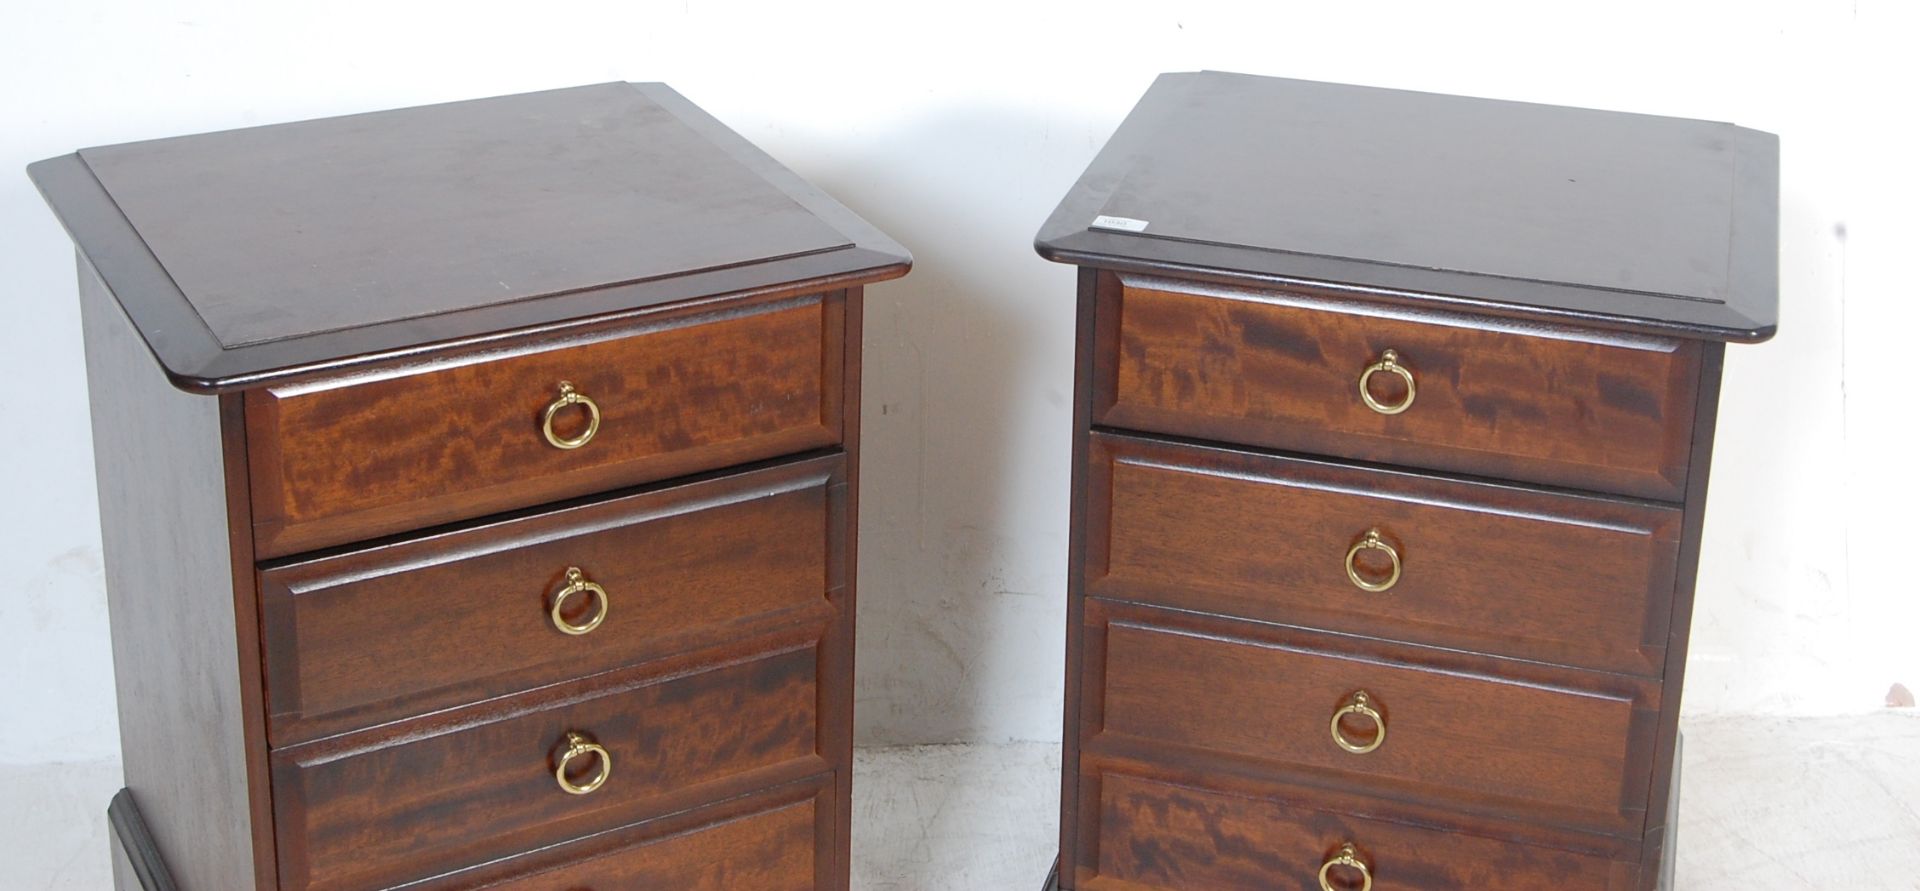 PAIR OF VINTAGE STAG MINSTREL BEDSIDE CHESTS OF DRAWERS - Image 2 of 18